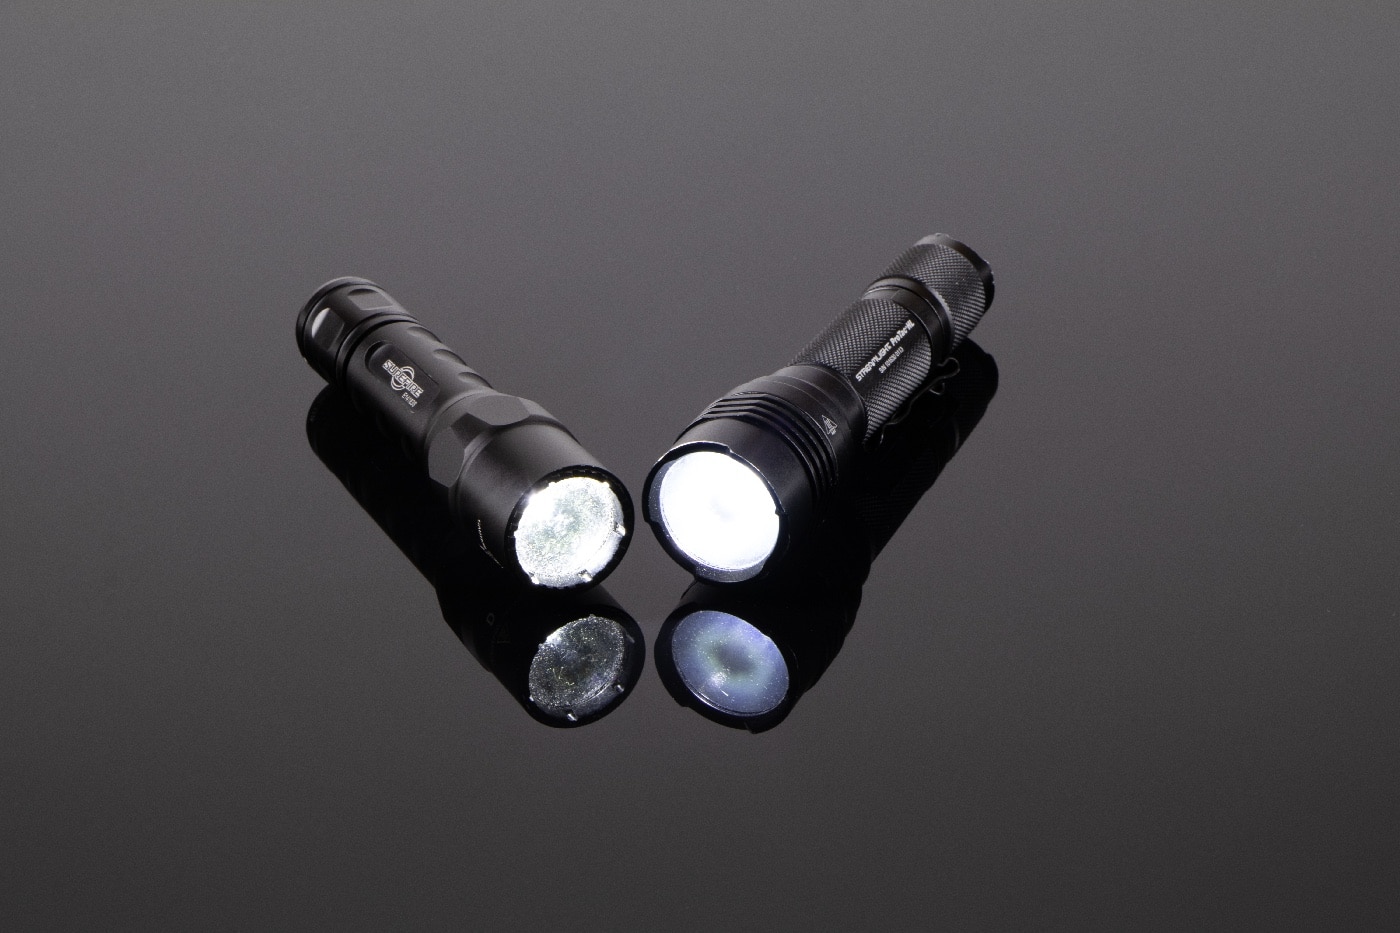 surefire flashlight streamlight tactical flashlight law enforcement and personal protection self defense use